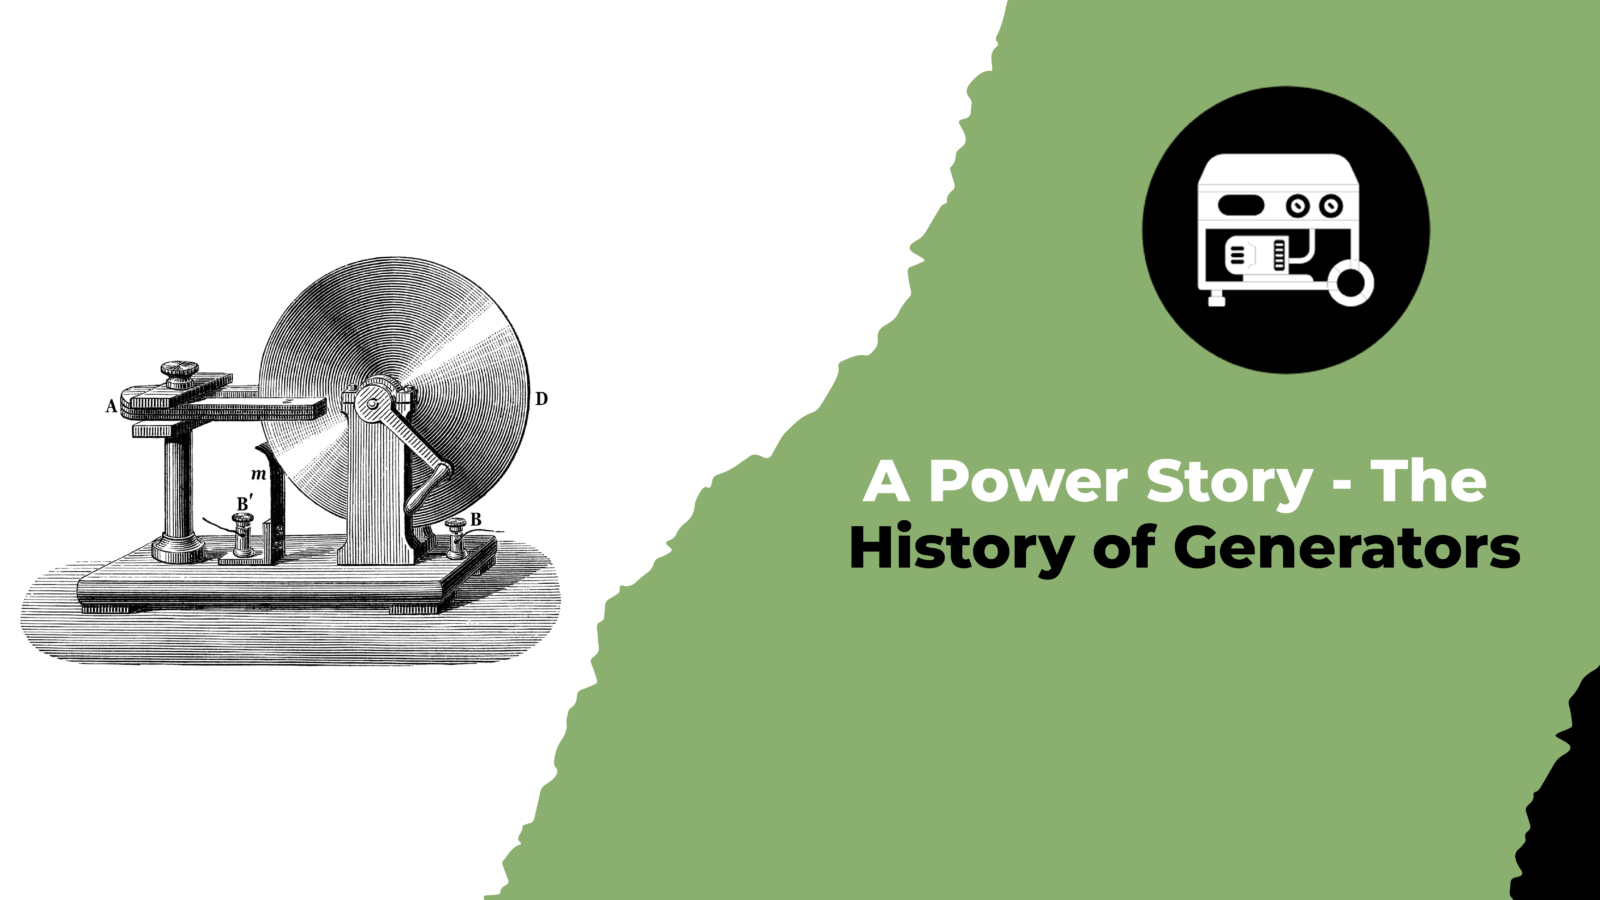 A Power Story - The History of Generators